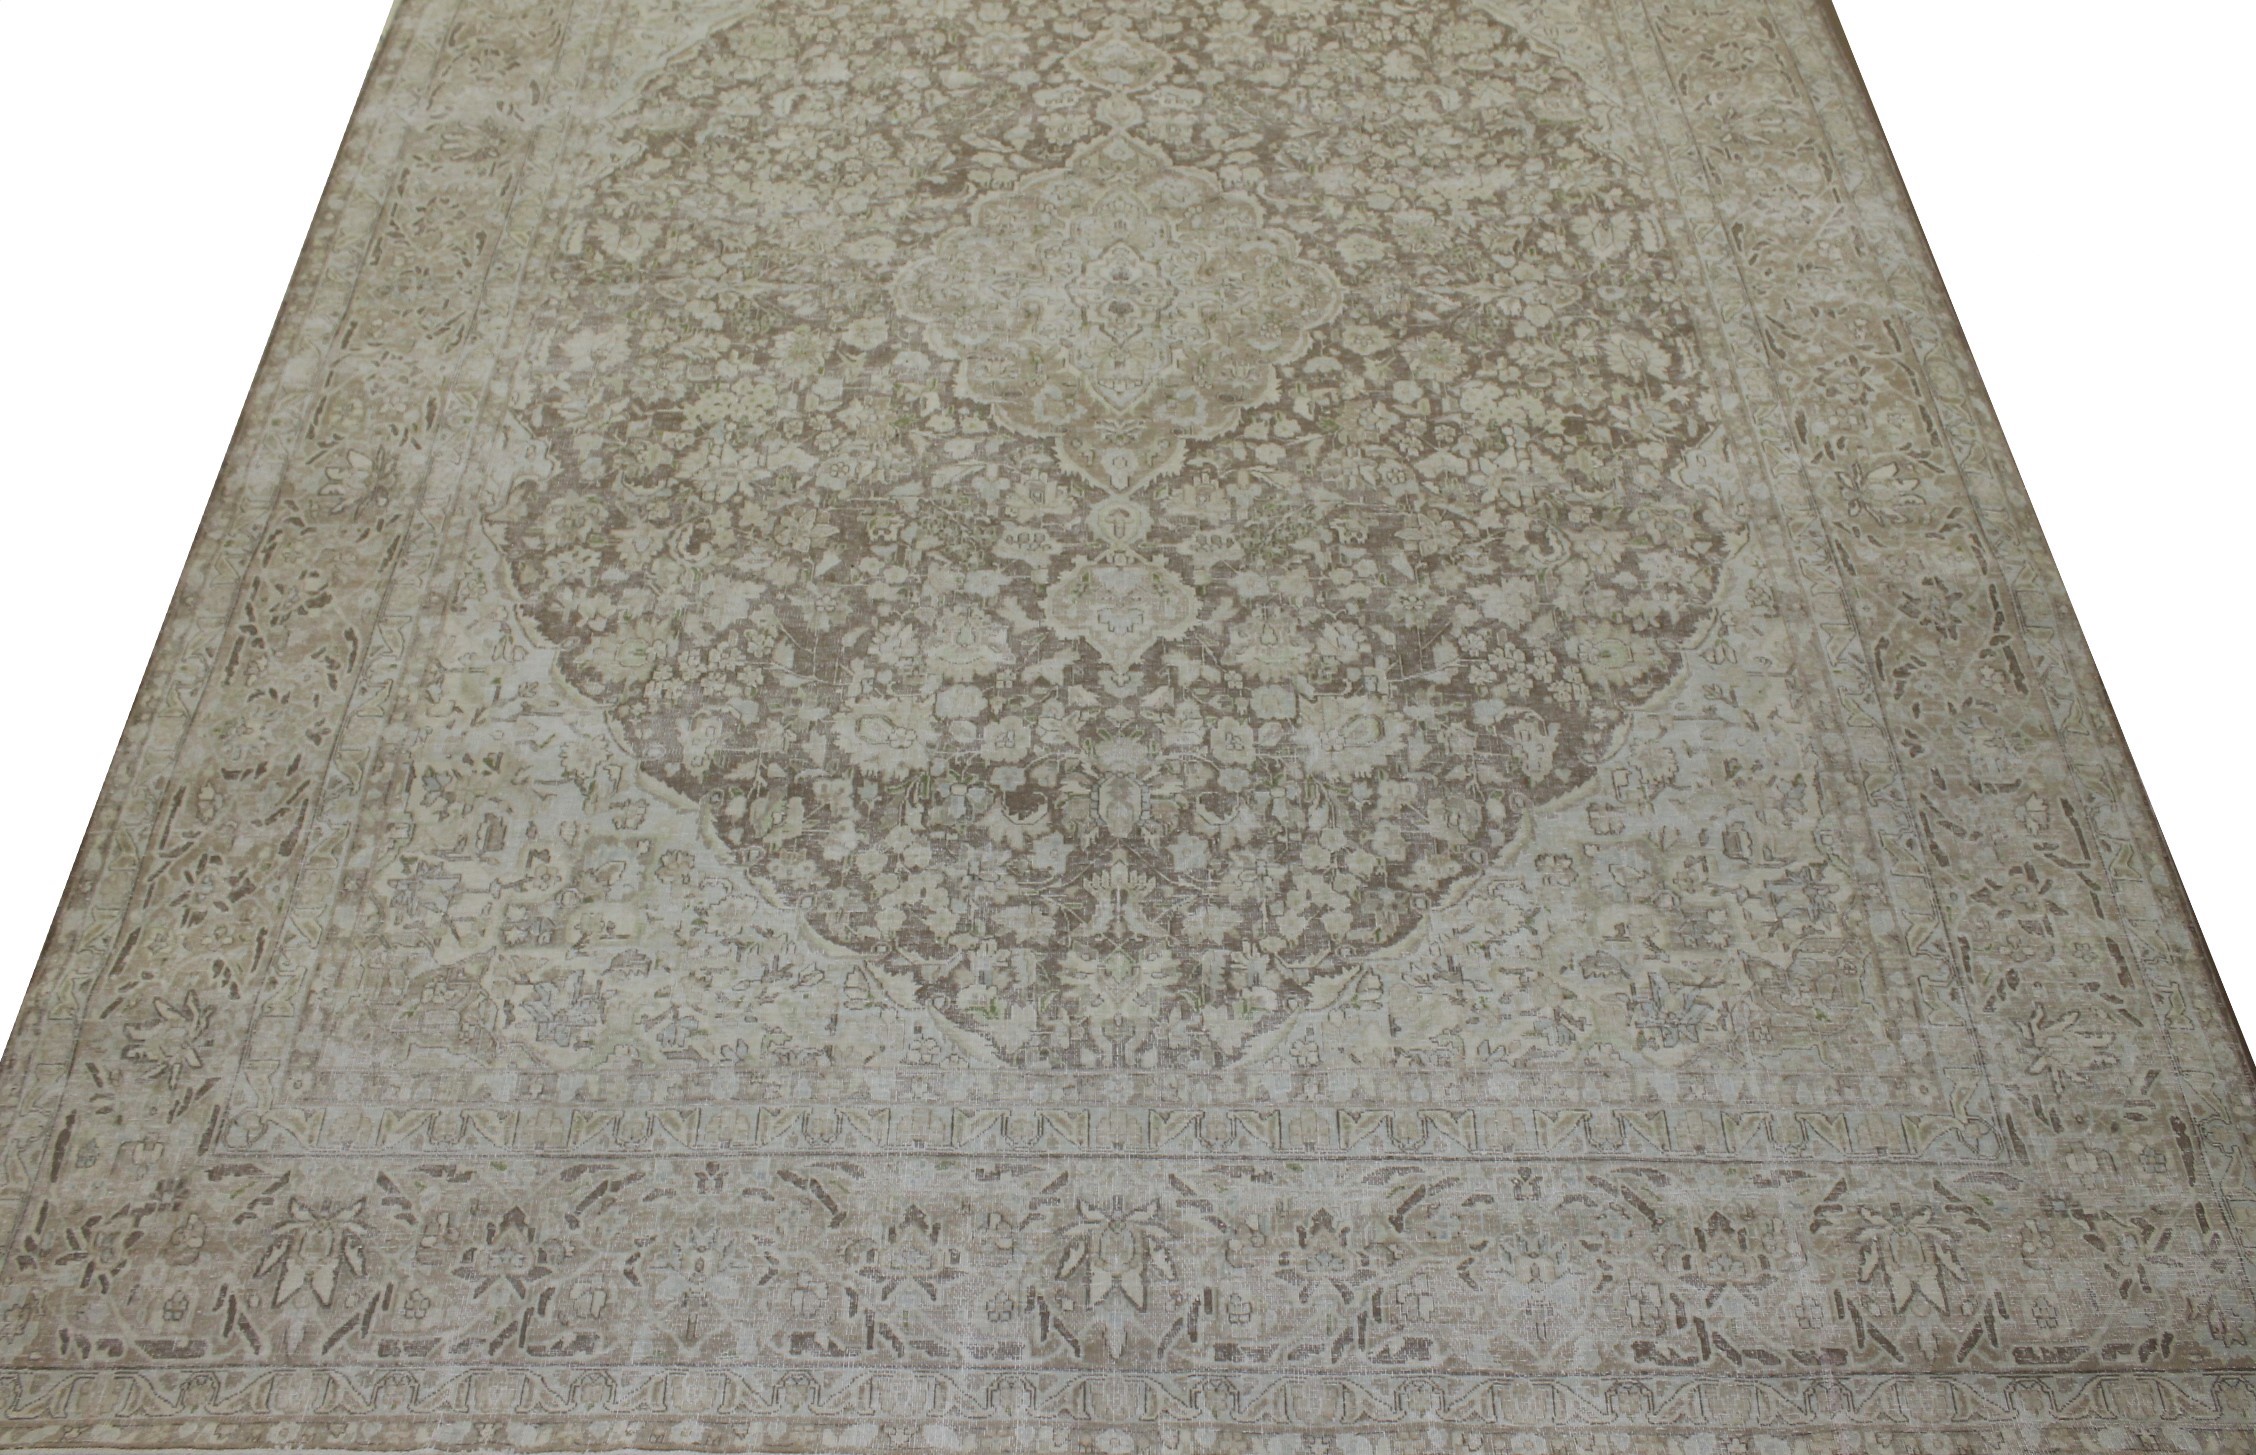 10x14 Vintage Hand Knotted Wool Area Rug - MR023301